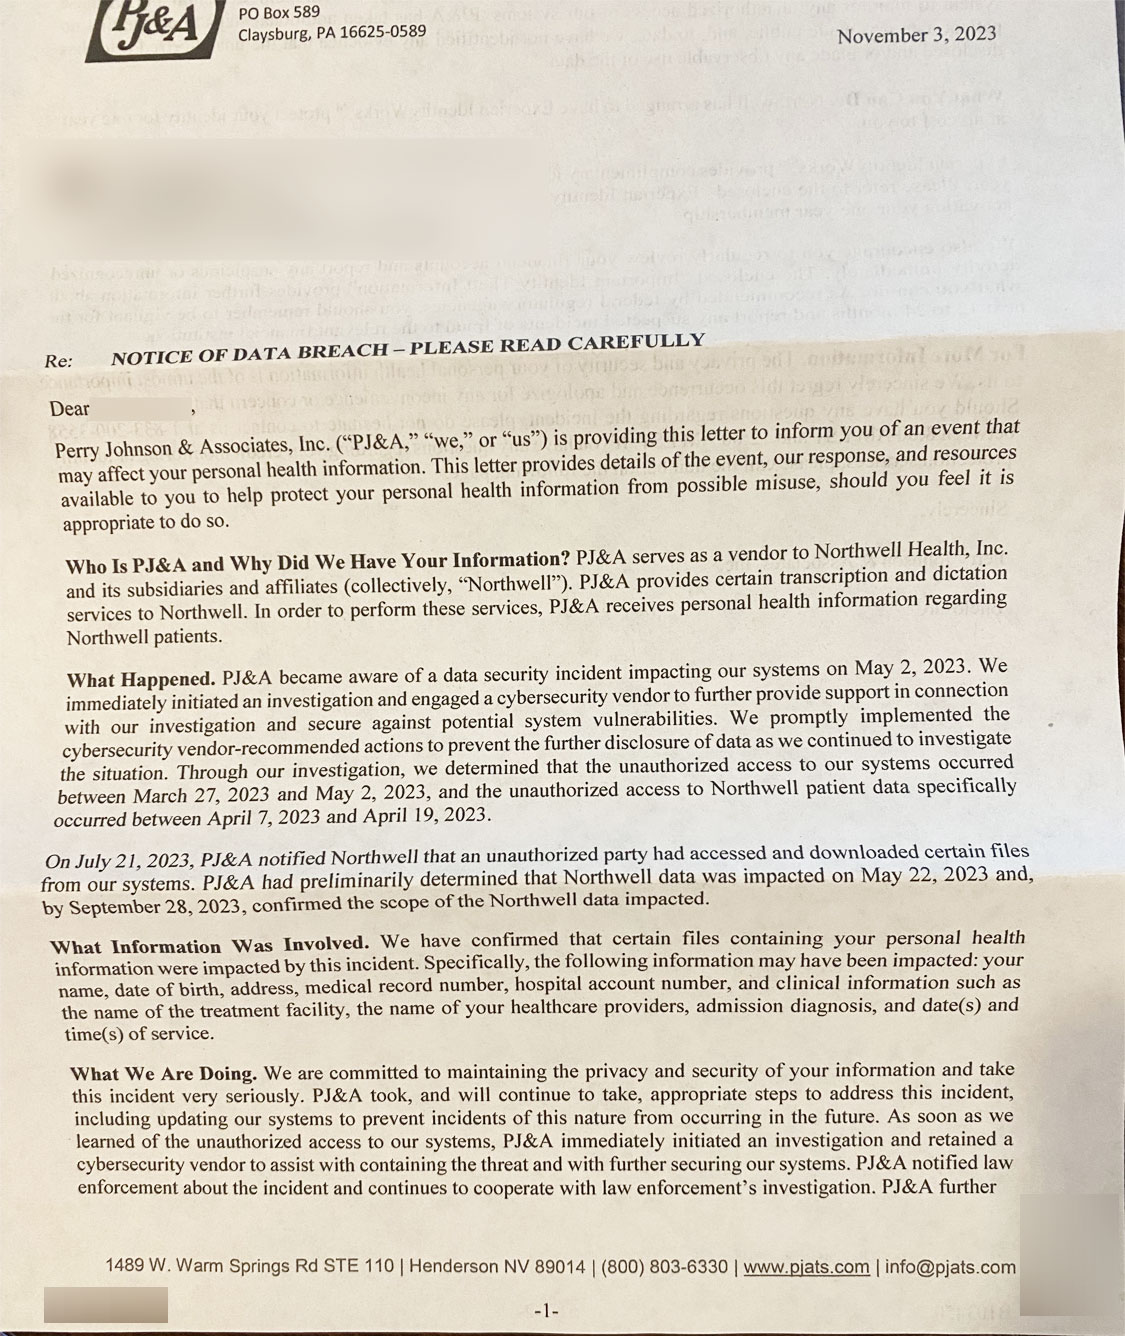 A letter containing the details of the data breach at PJ&A